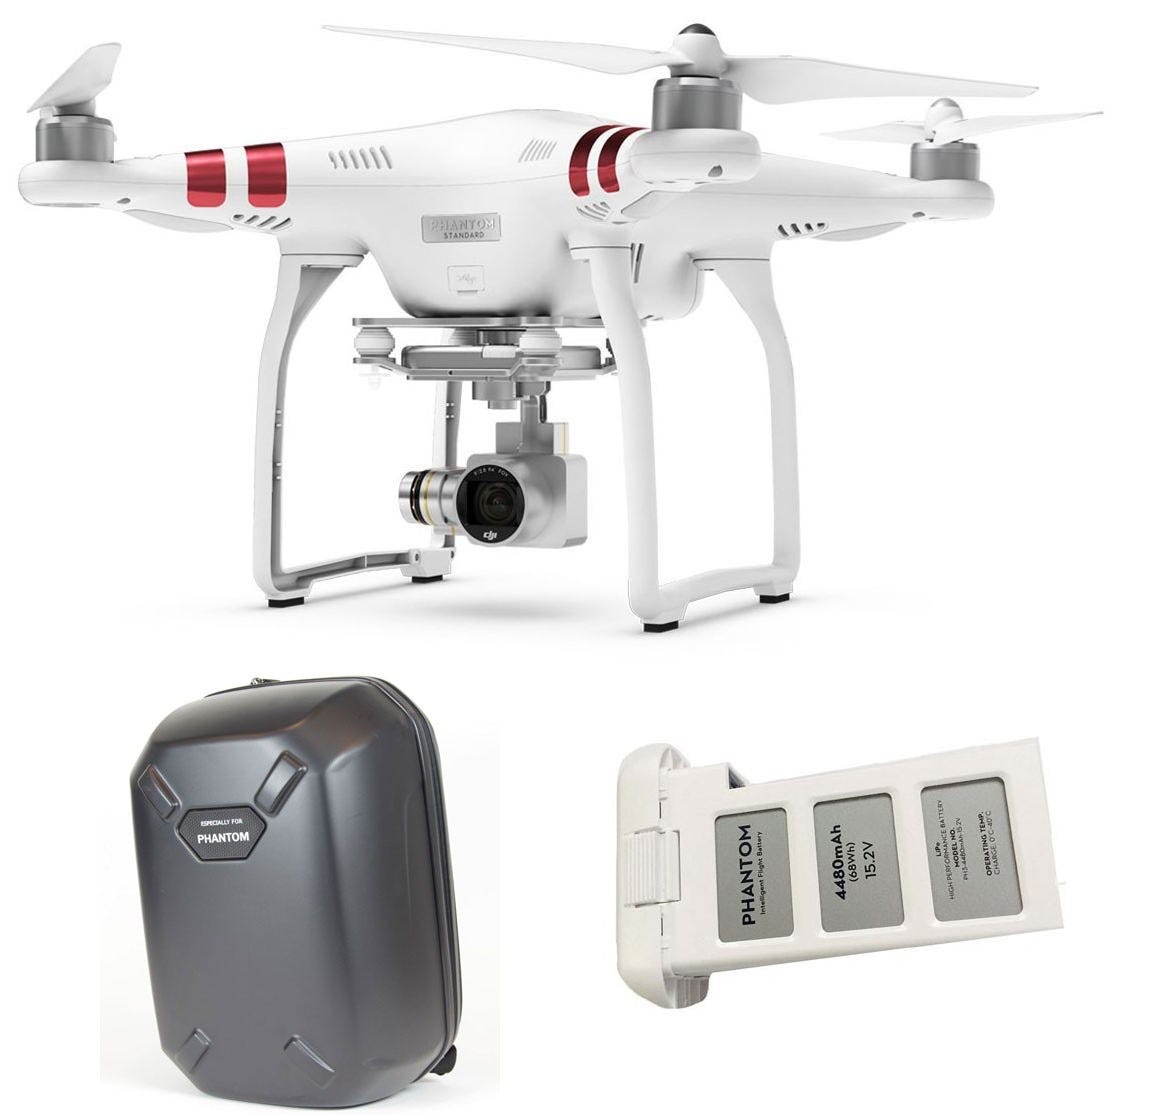 What Are The Differences Between All Four DJI Phantom 3 Models